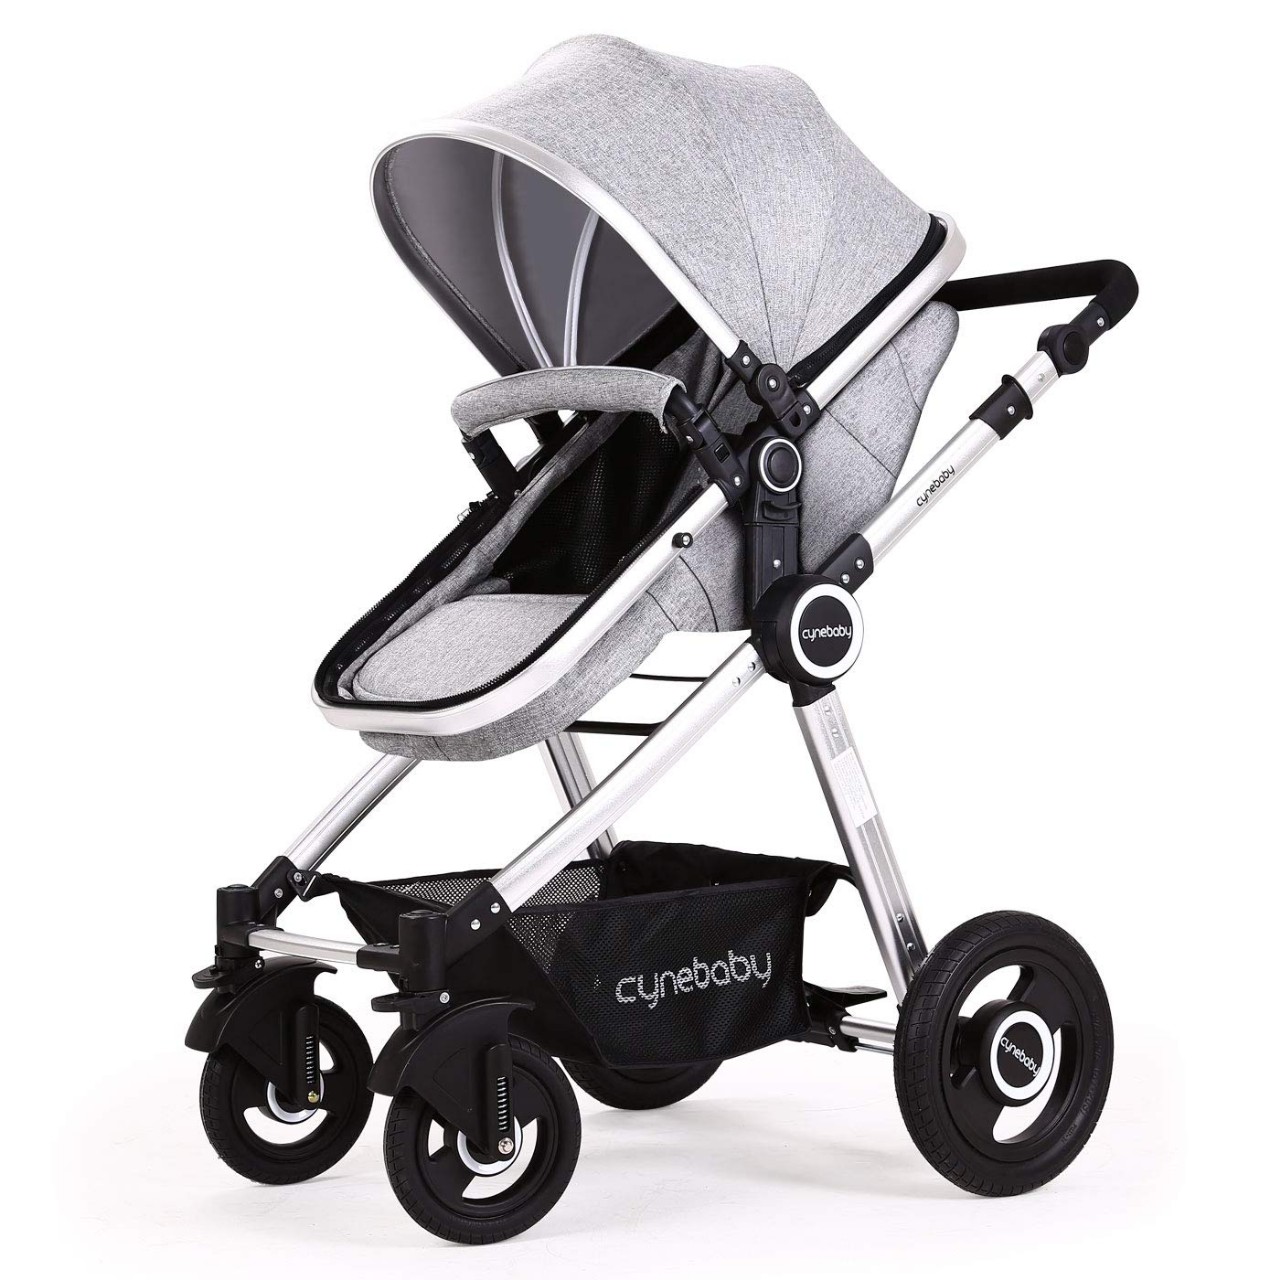 cynebaby Infant Toddler Baby Stroller Carriage Compact Pram Strollers